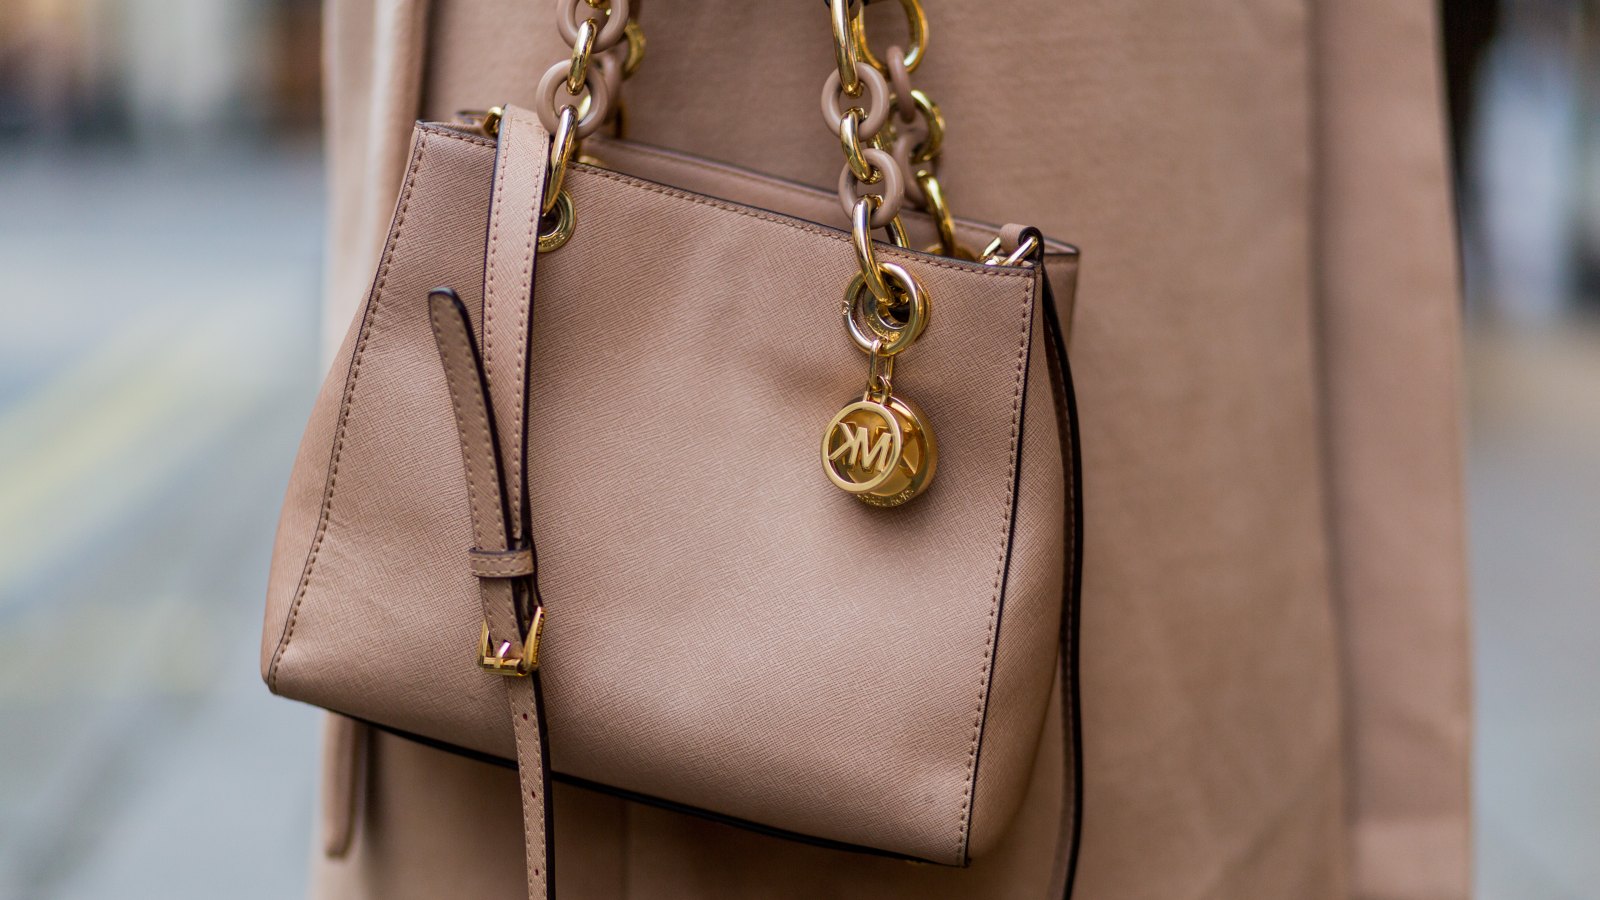 Lappe social Caius Shop Michael Kors Bags on Sale for Under $150 at Macy's